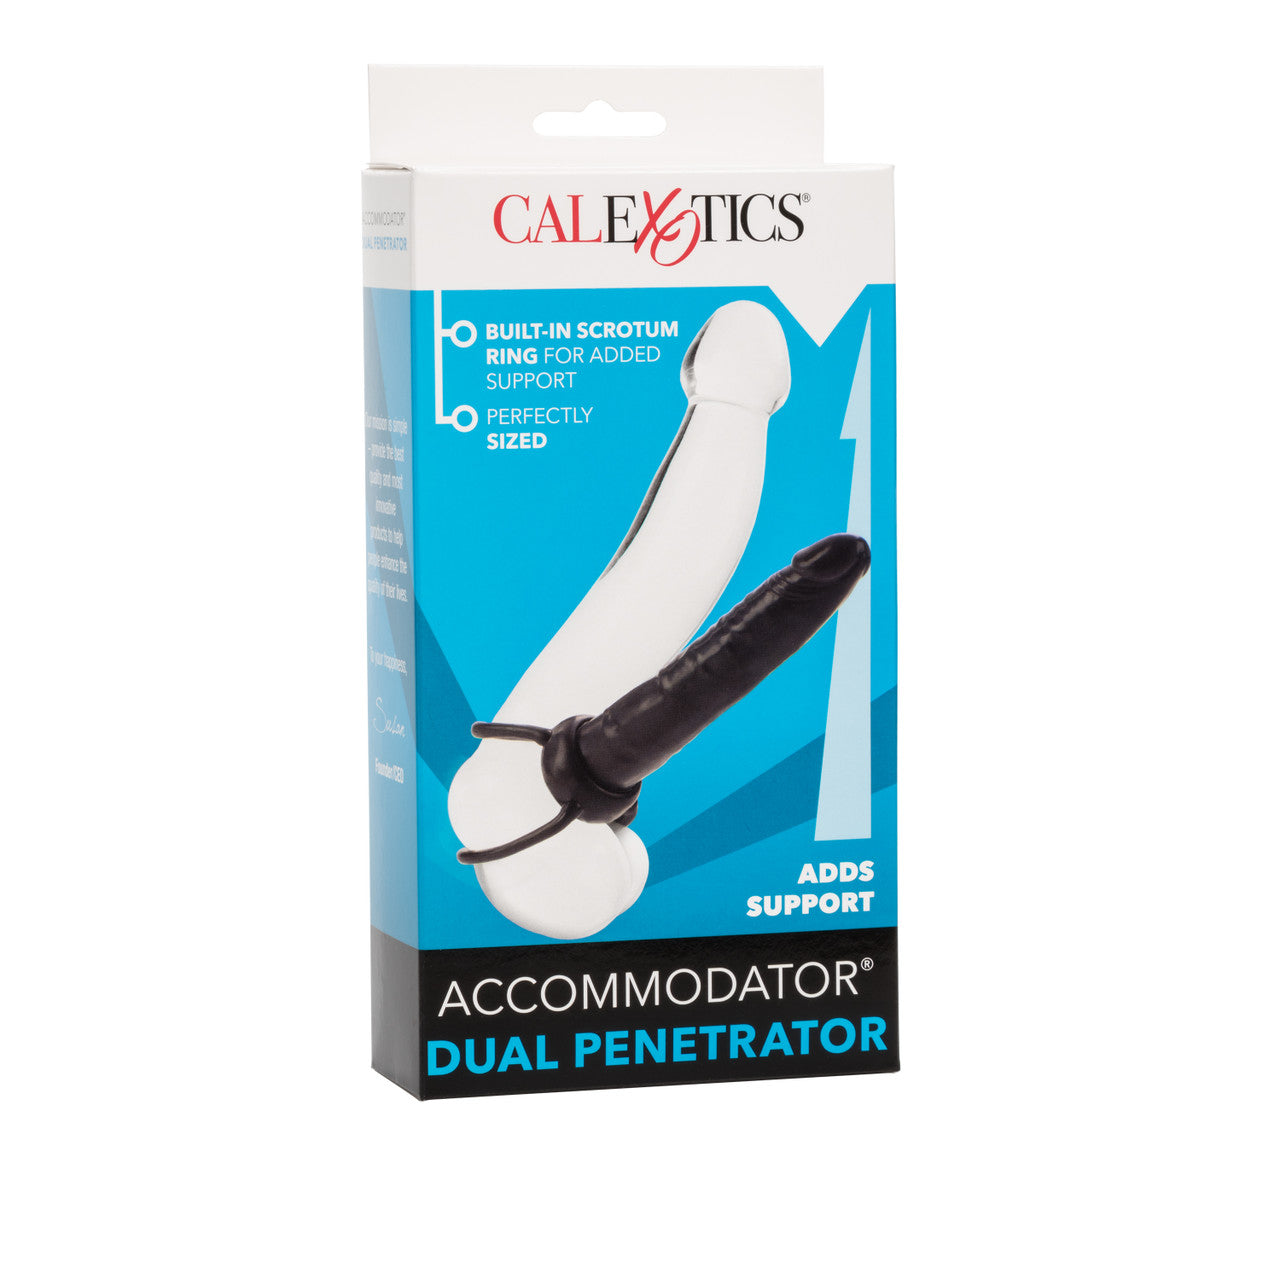 On the front of the packaging is the CalExotics logo, product features: Built-In scrotum ring for added support; Perfectly sized, an illustrated image of a penis, with an image of the product showing the product's placement "adds support" written bellow, and product name "Accommodator Dual Penetrator".